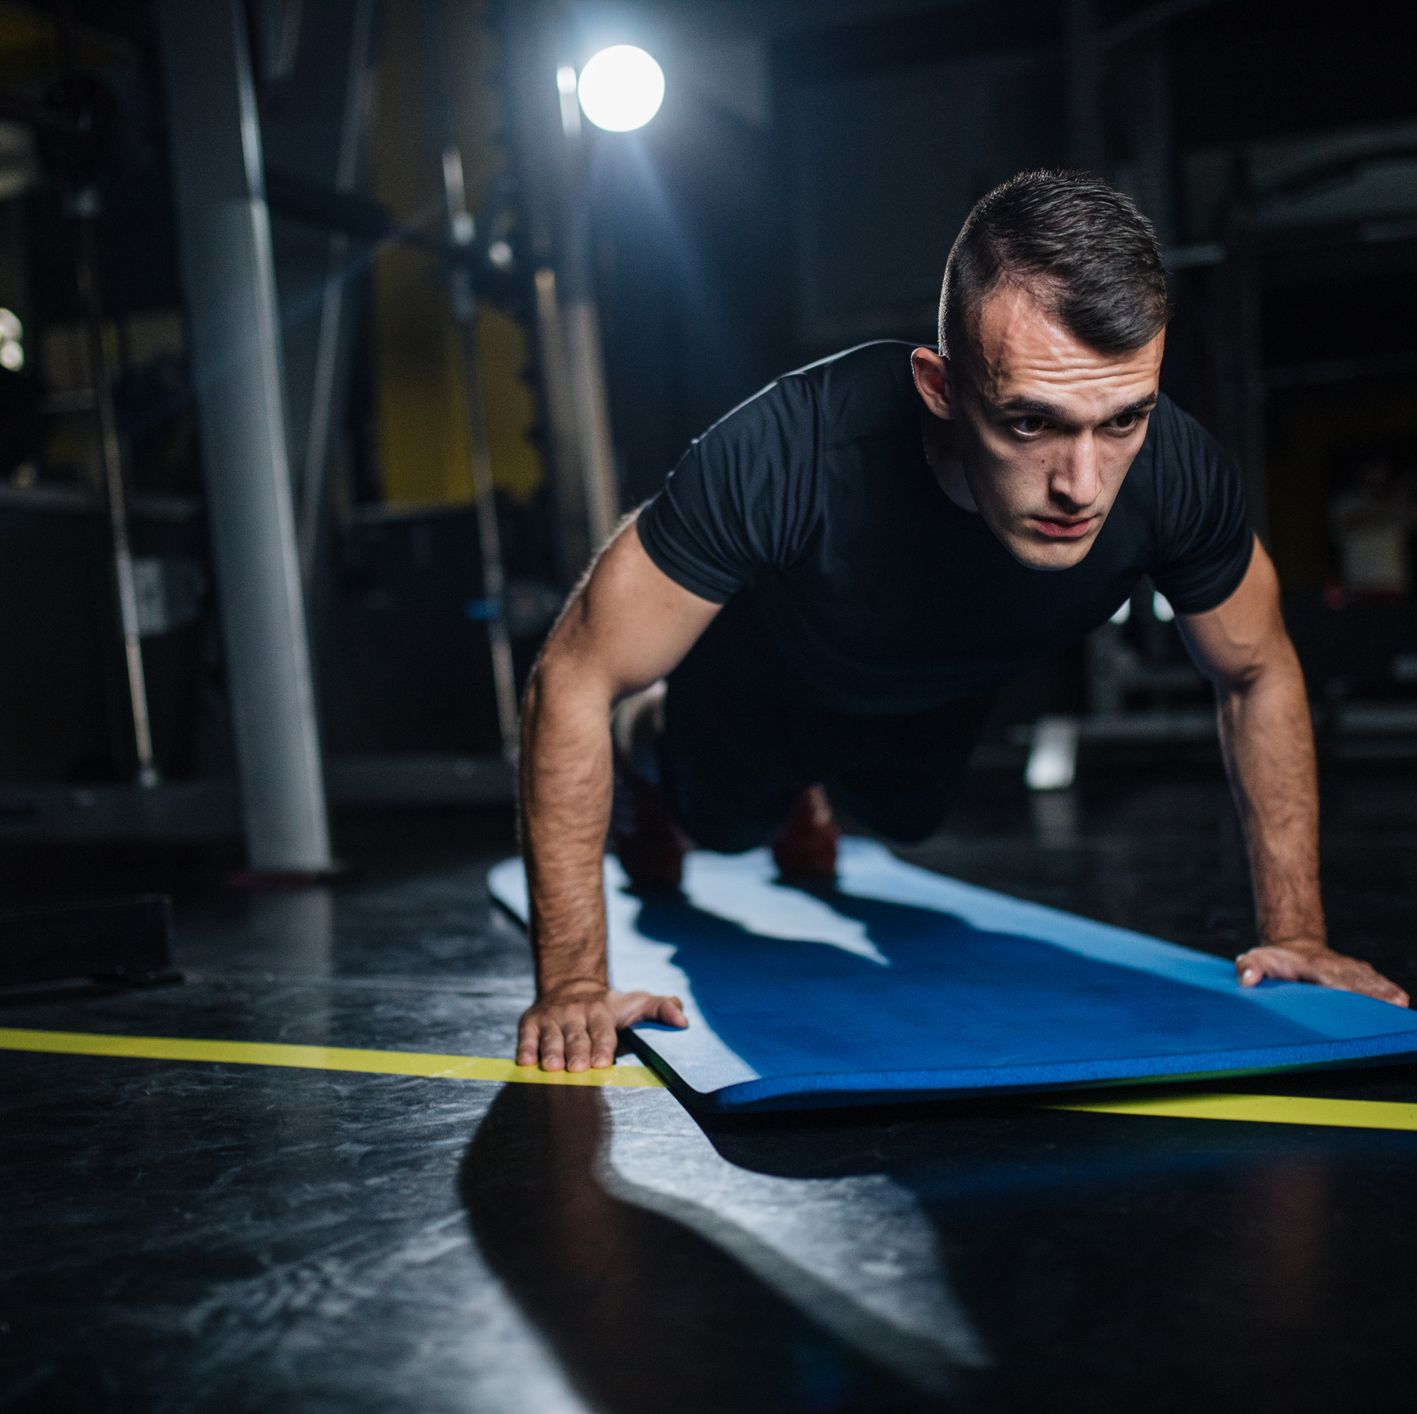 How to Make the Most of a 5-Minute Workout